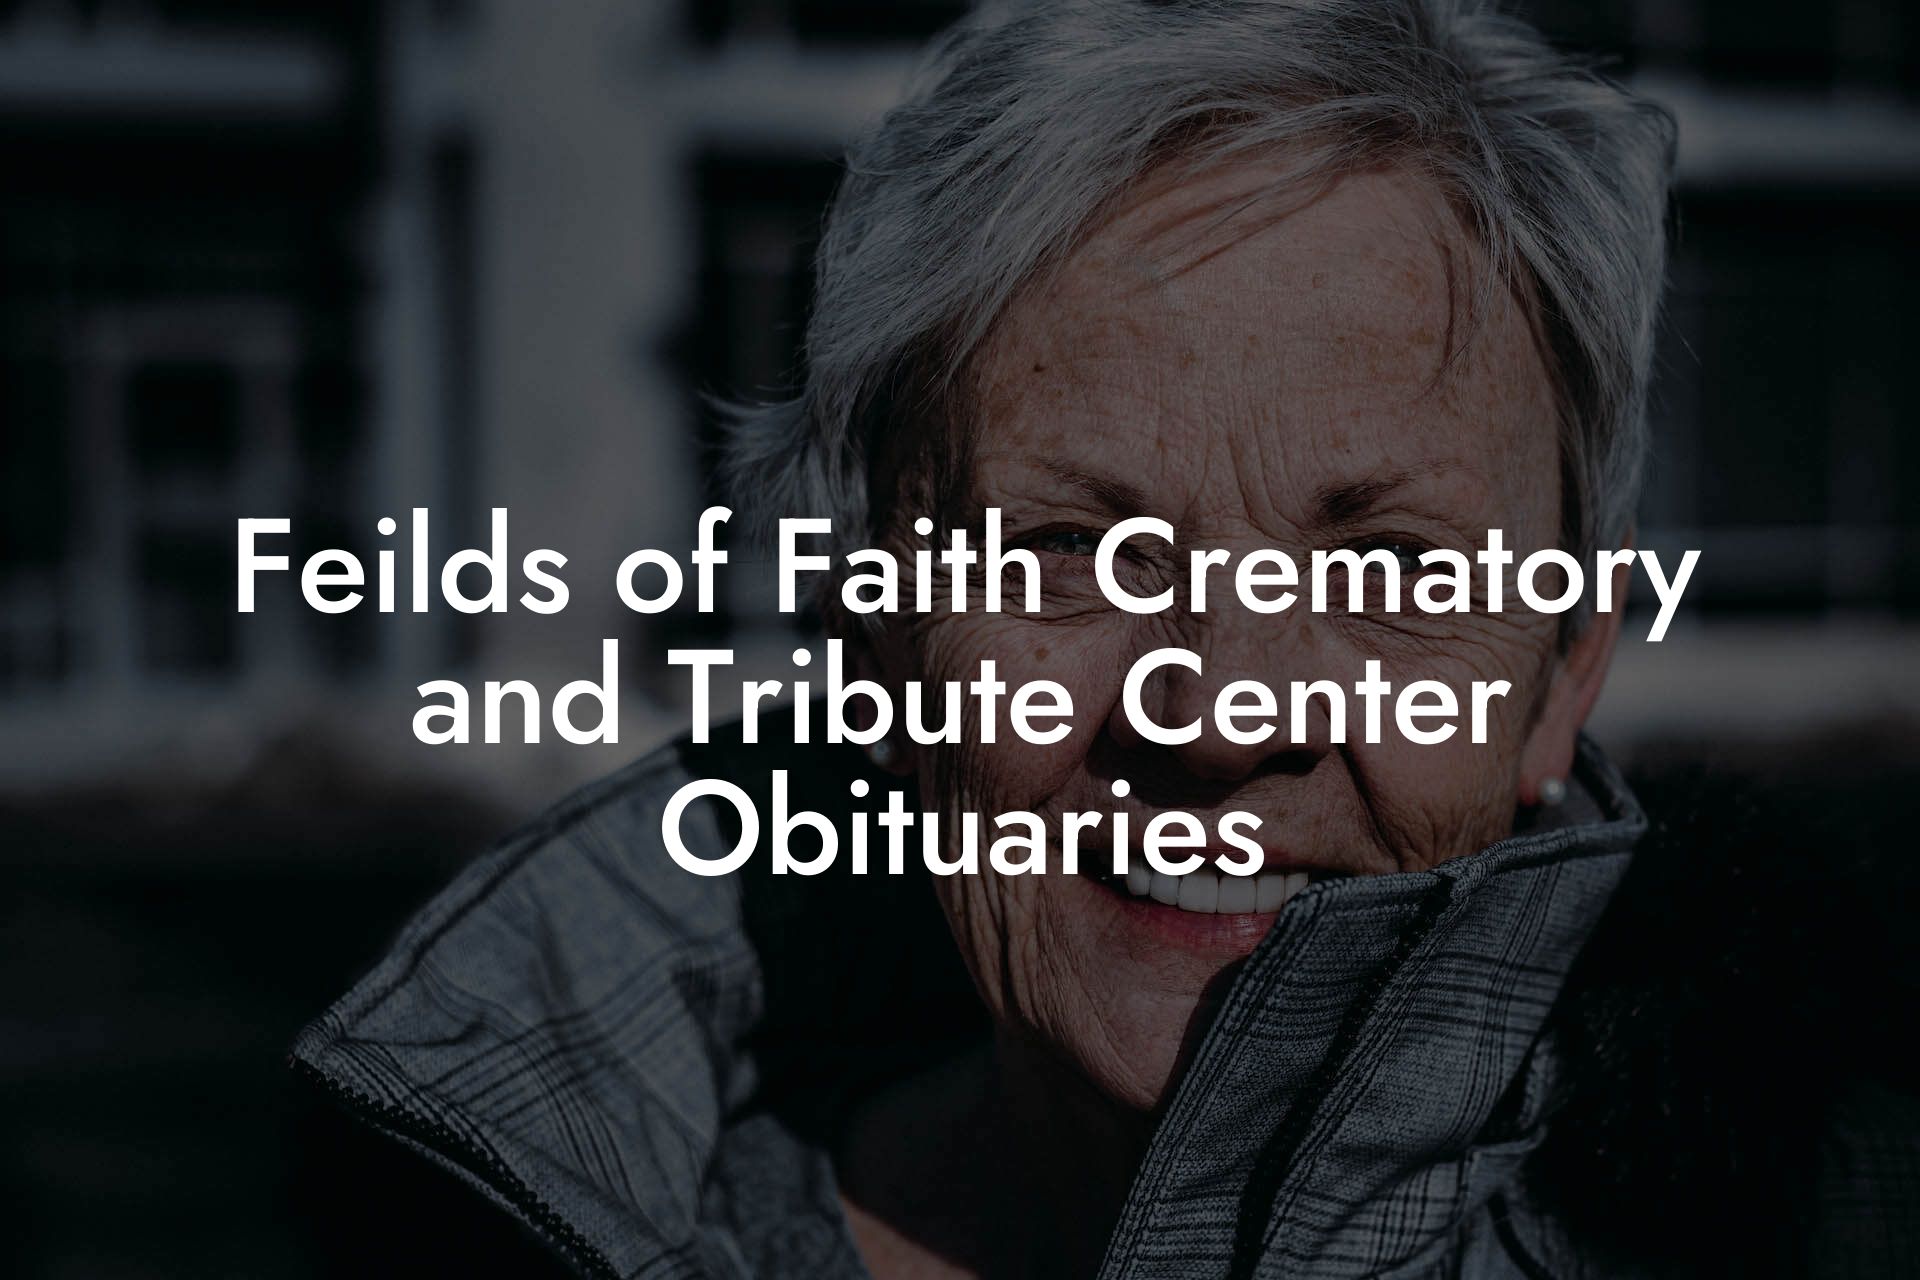 Feilds of Faith Crematory and Tribute Center Obituaries